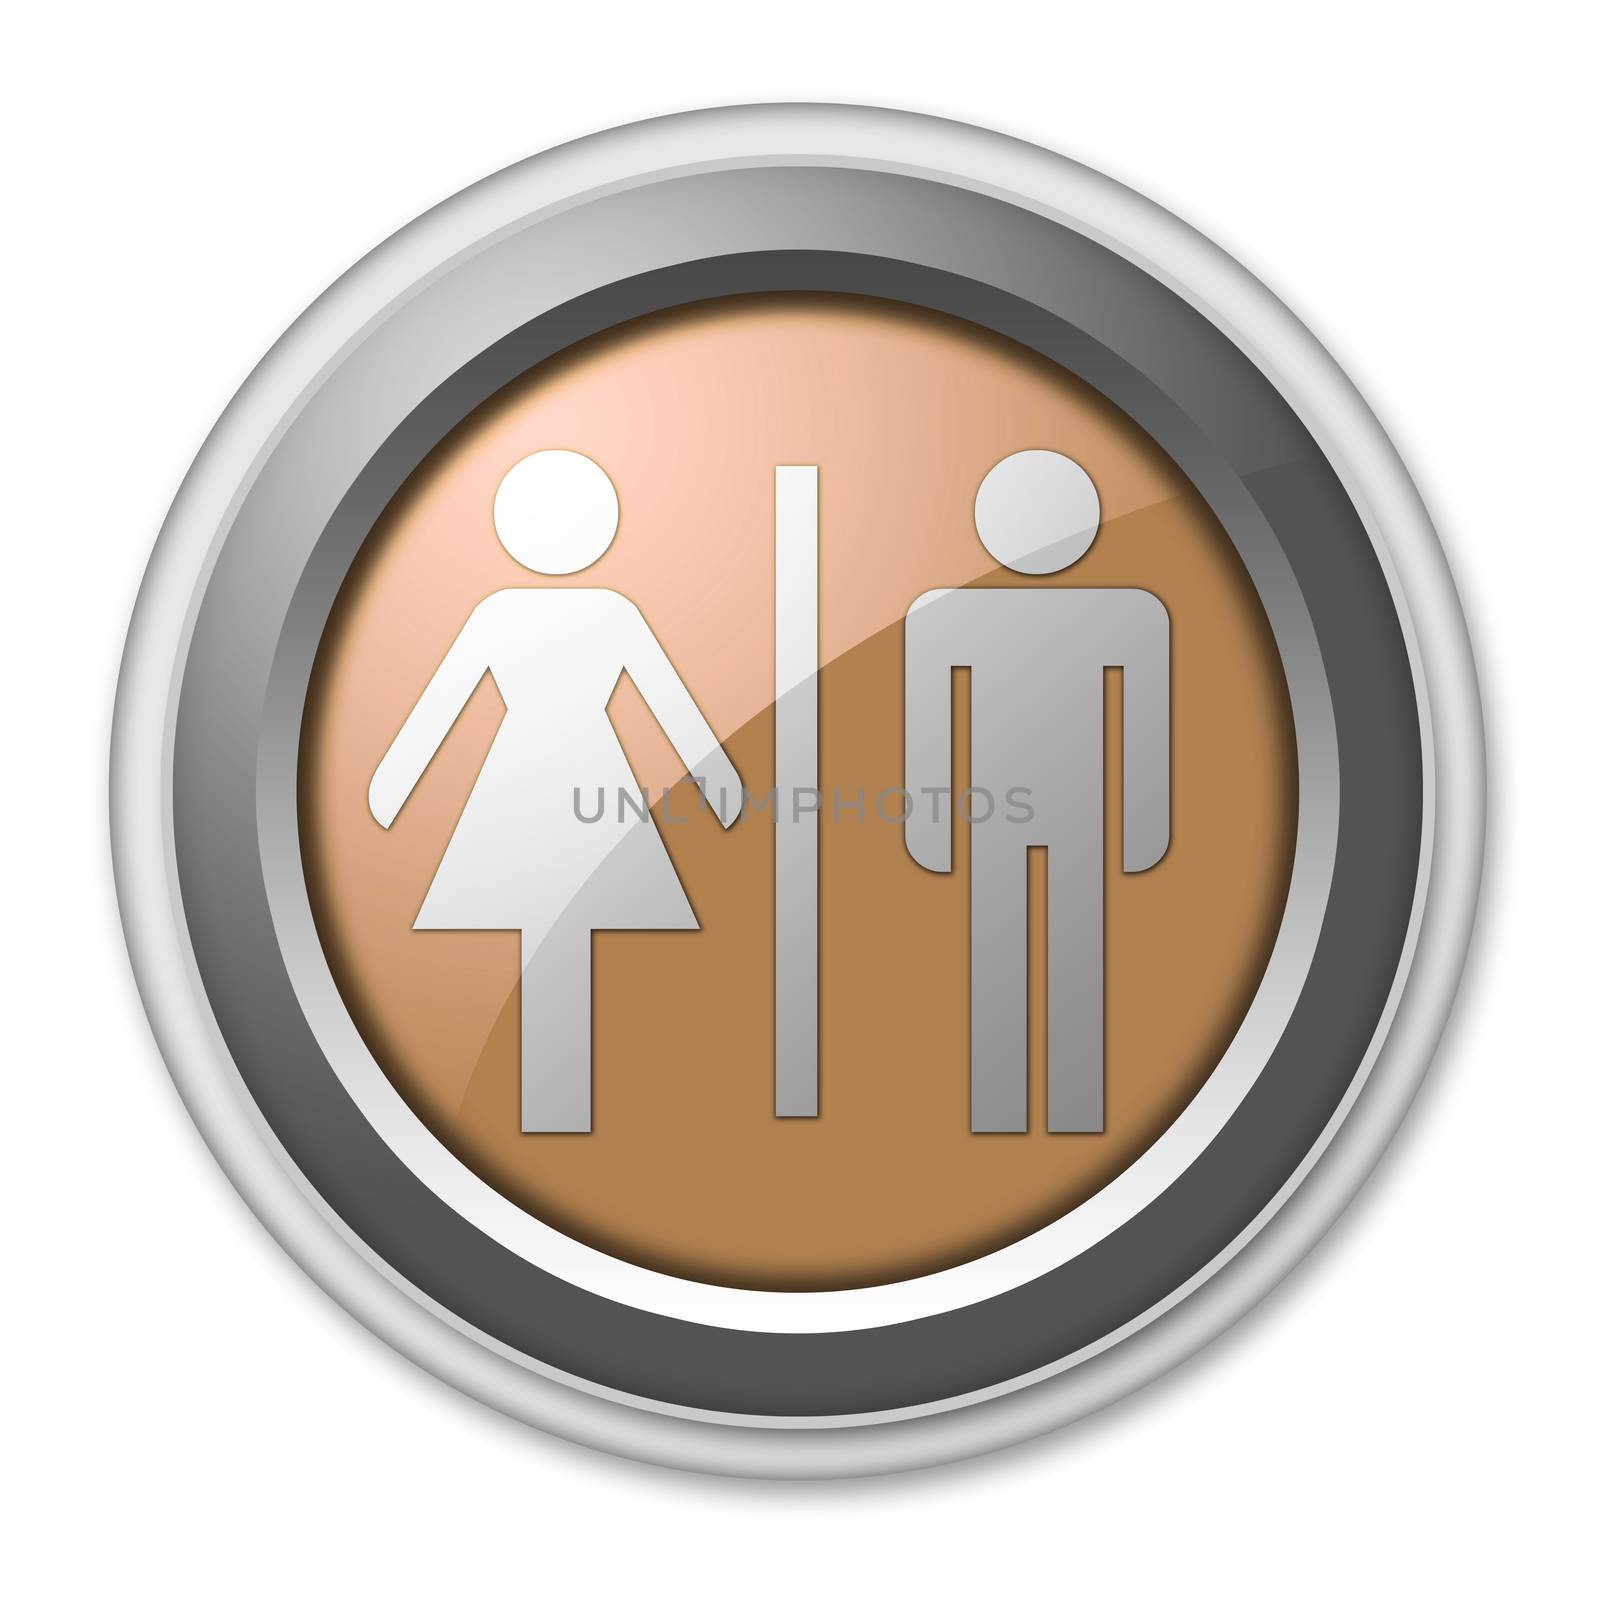 Icon, Button, Pictogram with Restrooms symbol